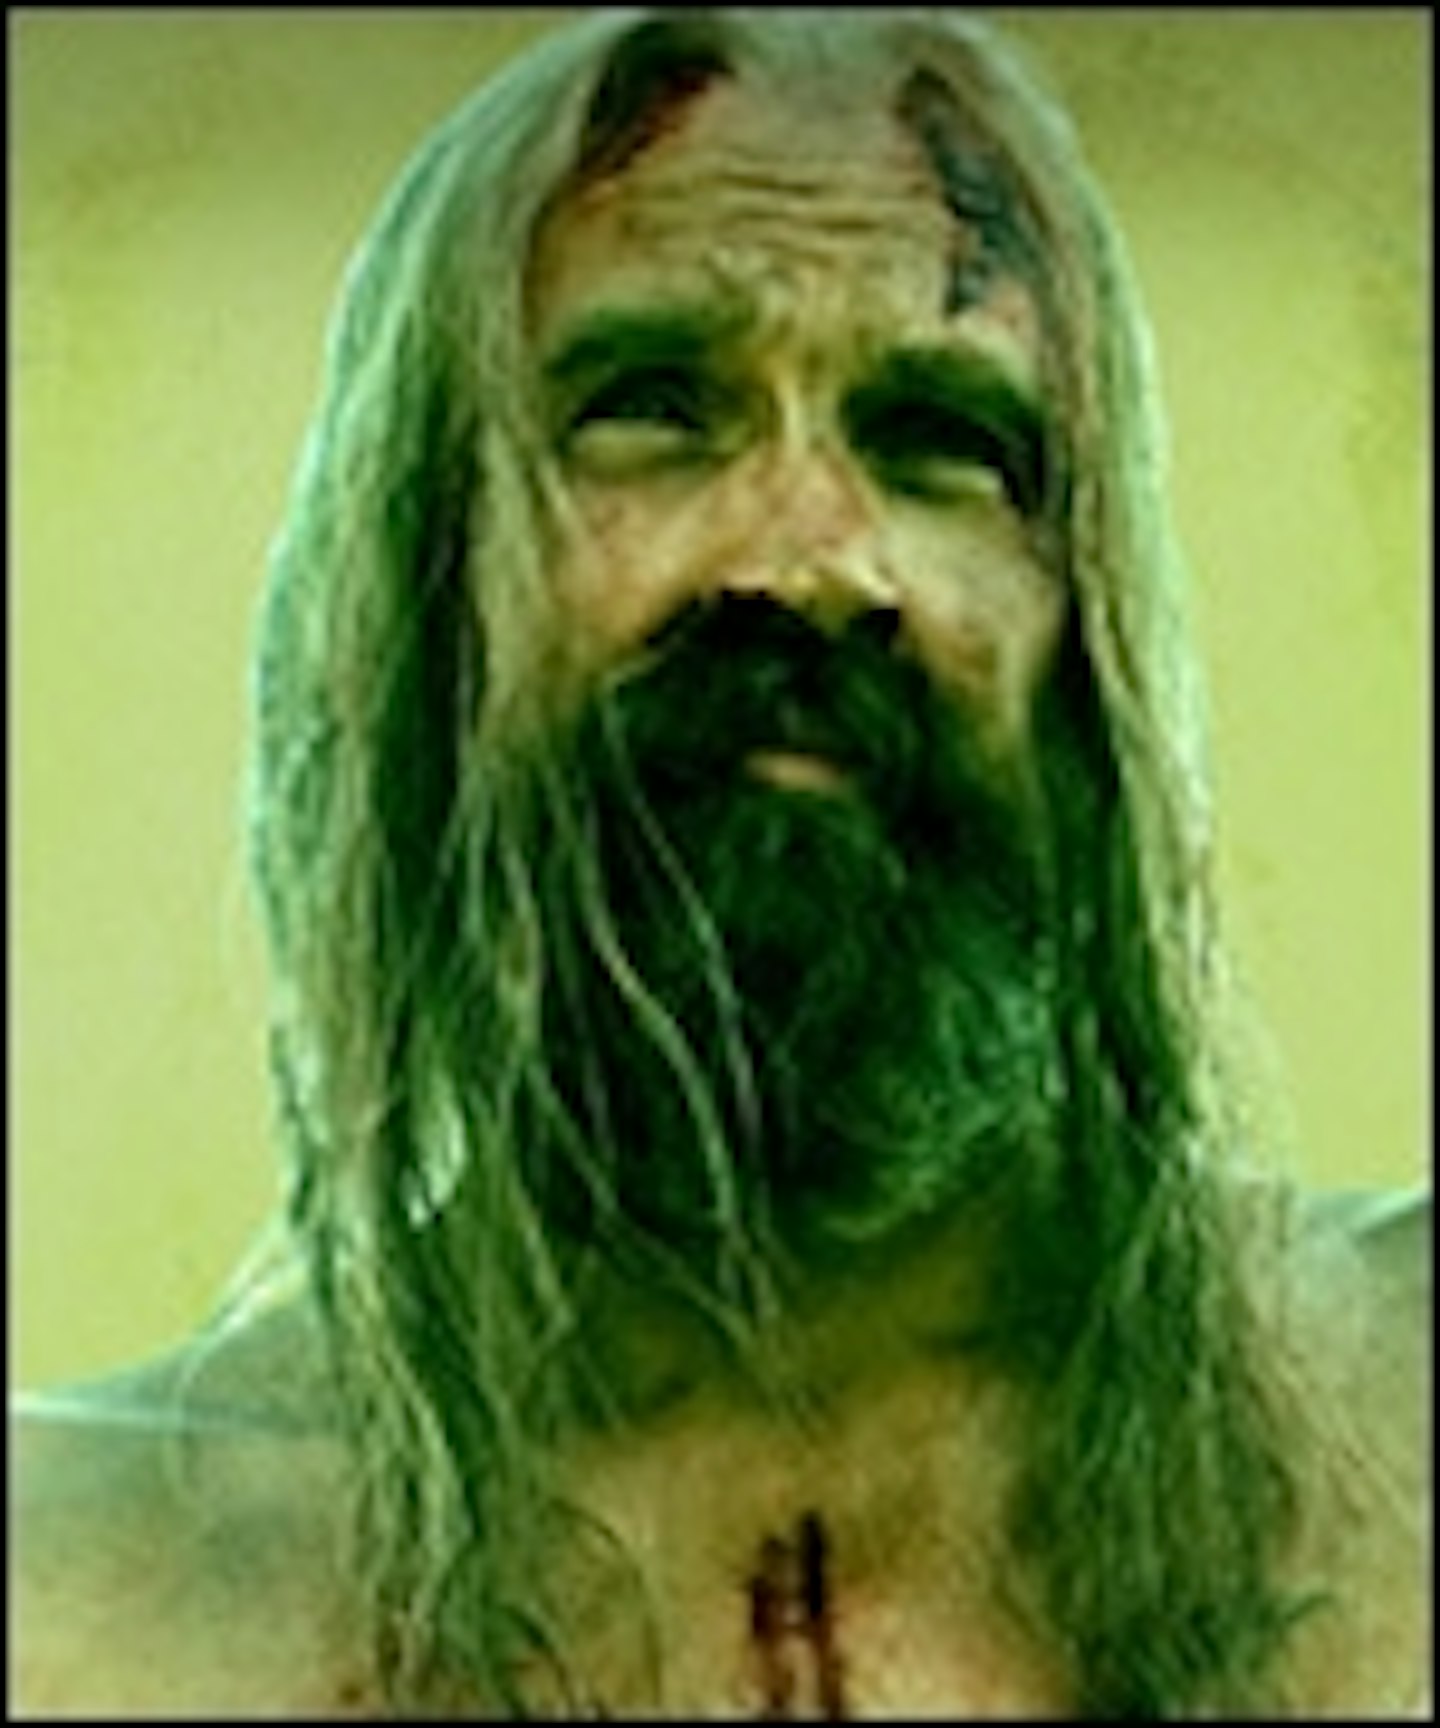 Bill Moseley Joins Texas Chainsaw 3D